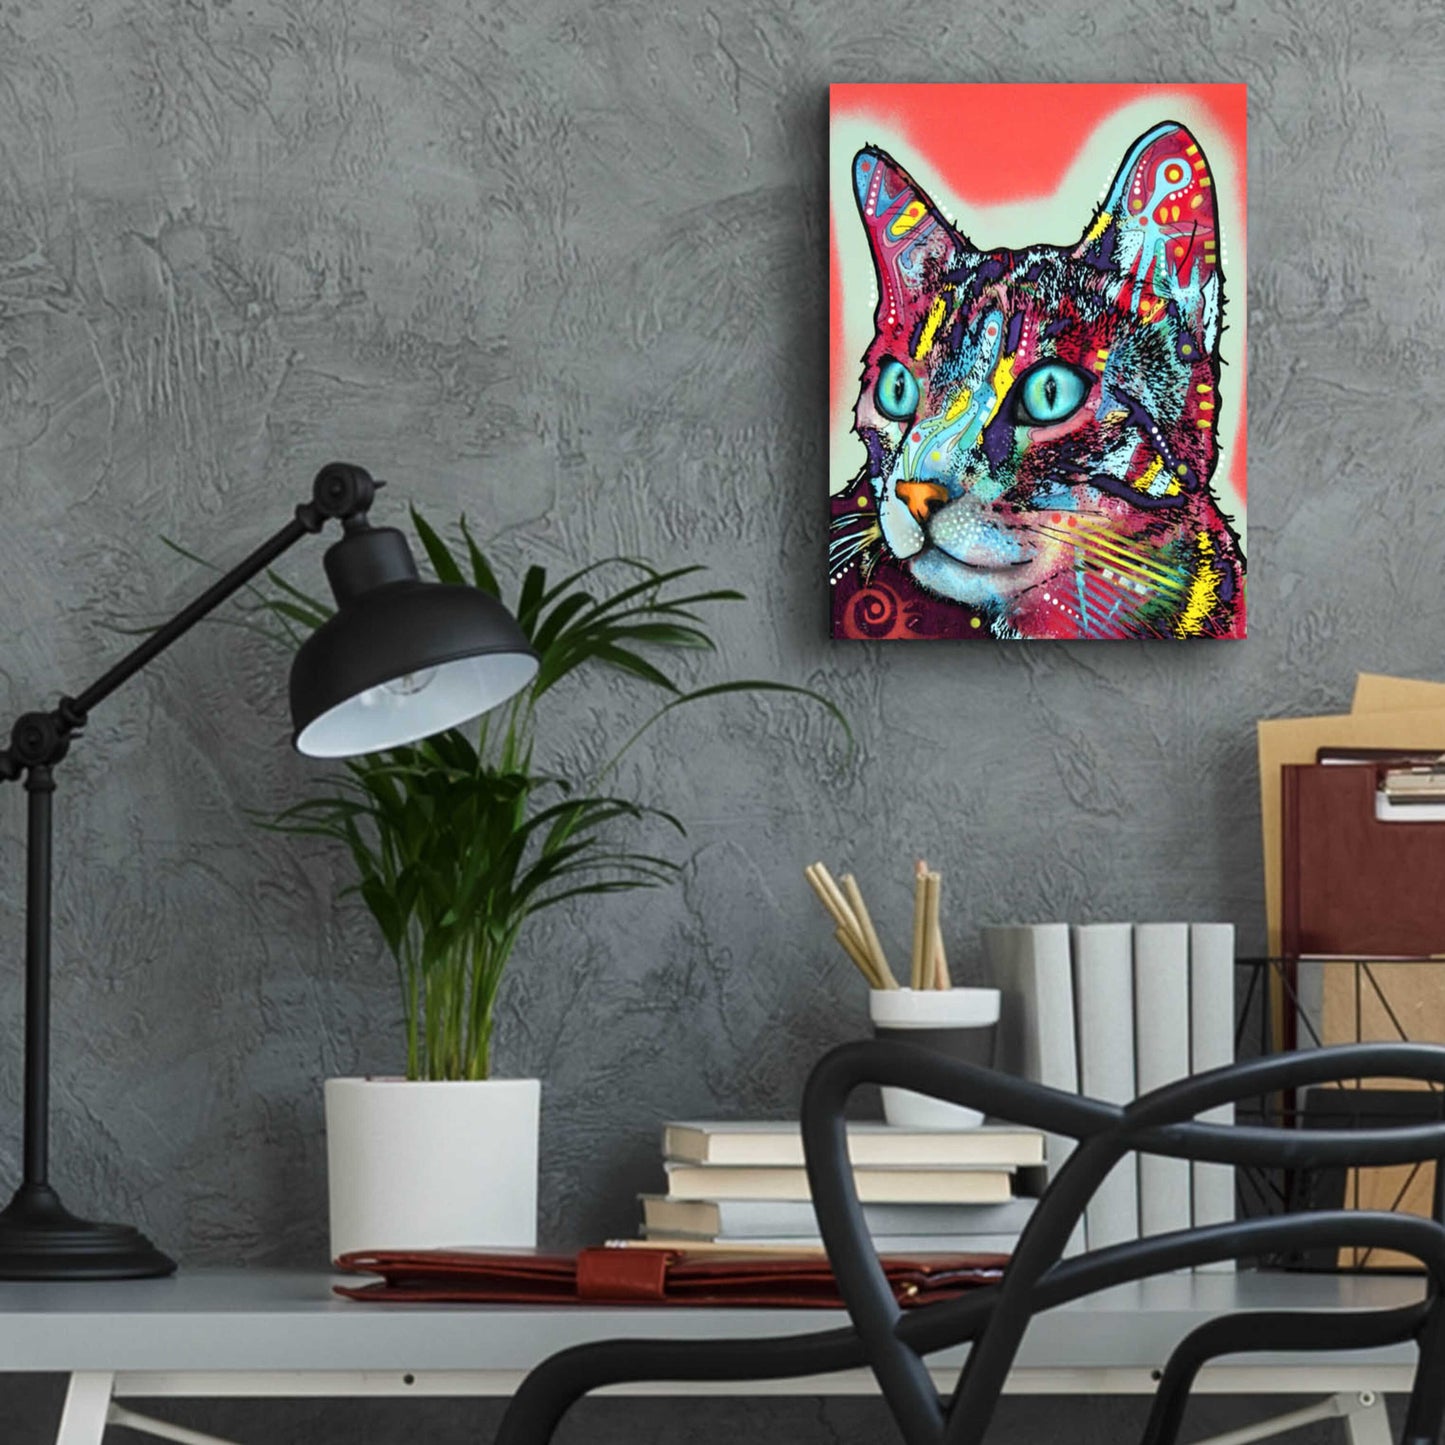 Epic Art 'Curious Cat' by Dean Russo, Acrylic Glass Wall Art,12x16